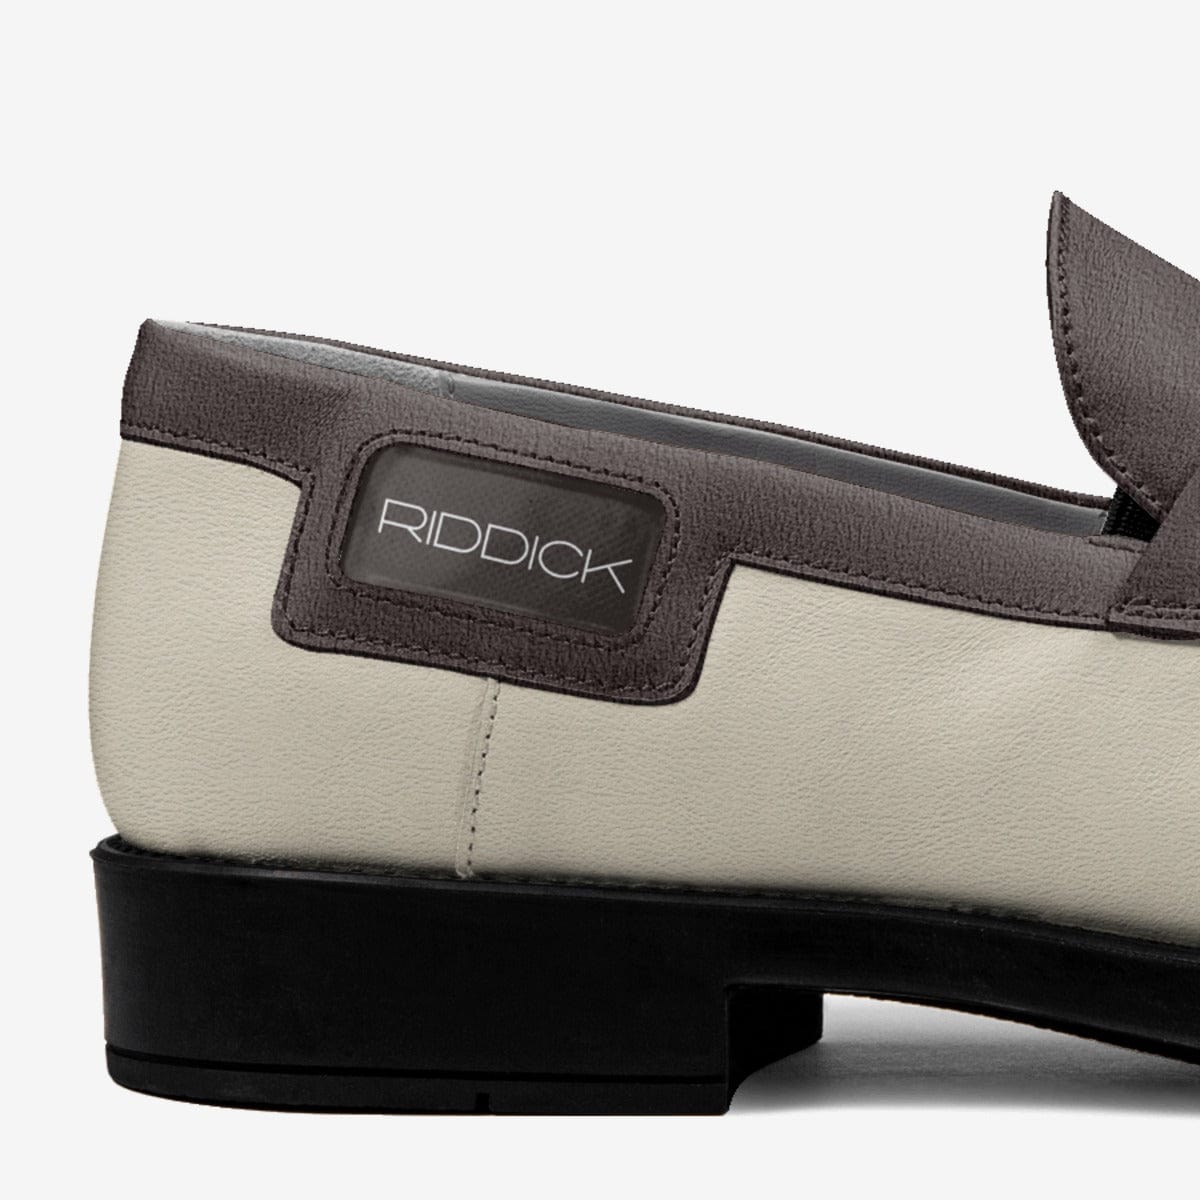 EXEC, THE TASSEL (IN 2-TONE EARTH) - Riddick Shoes Shoe Riddick Shoes   